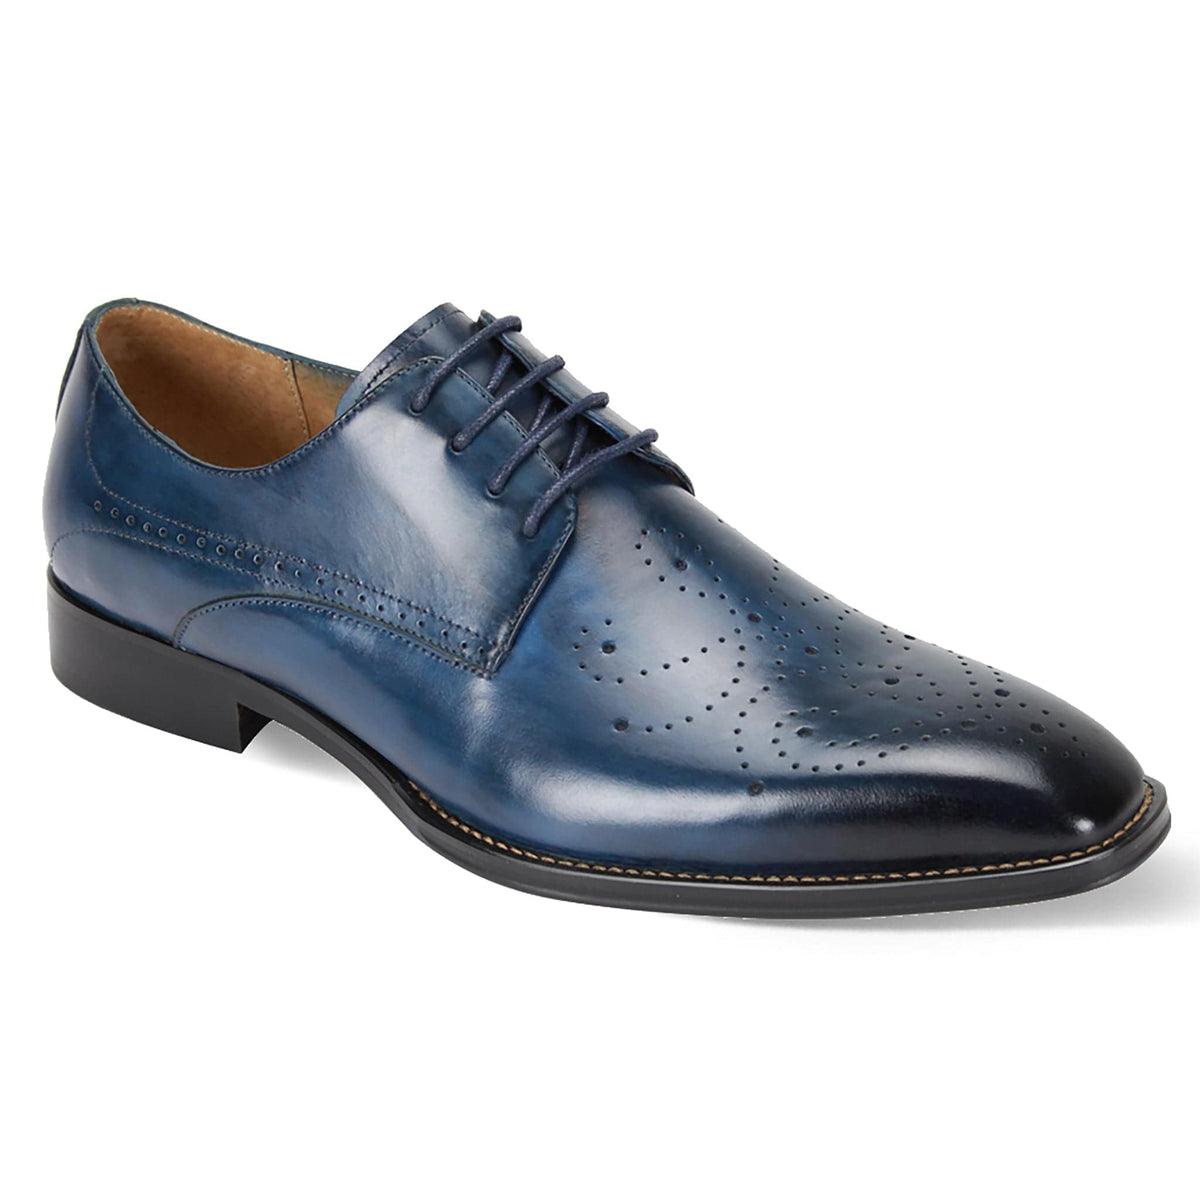 GIOVANNI LEATHER SHOES FT BLUE / 7 GIOVANNI LEATHER SHOES-JOEL